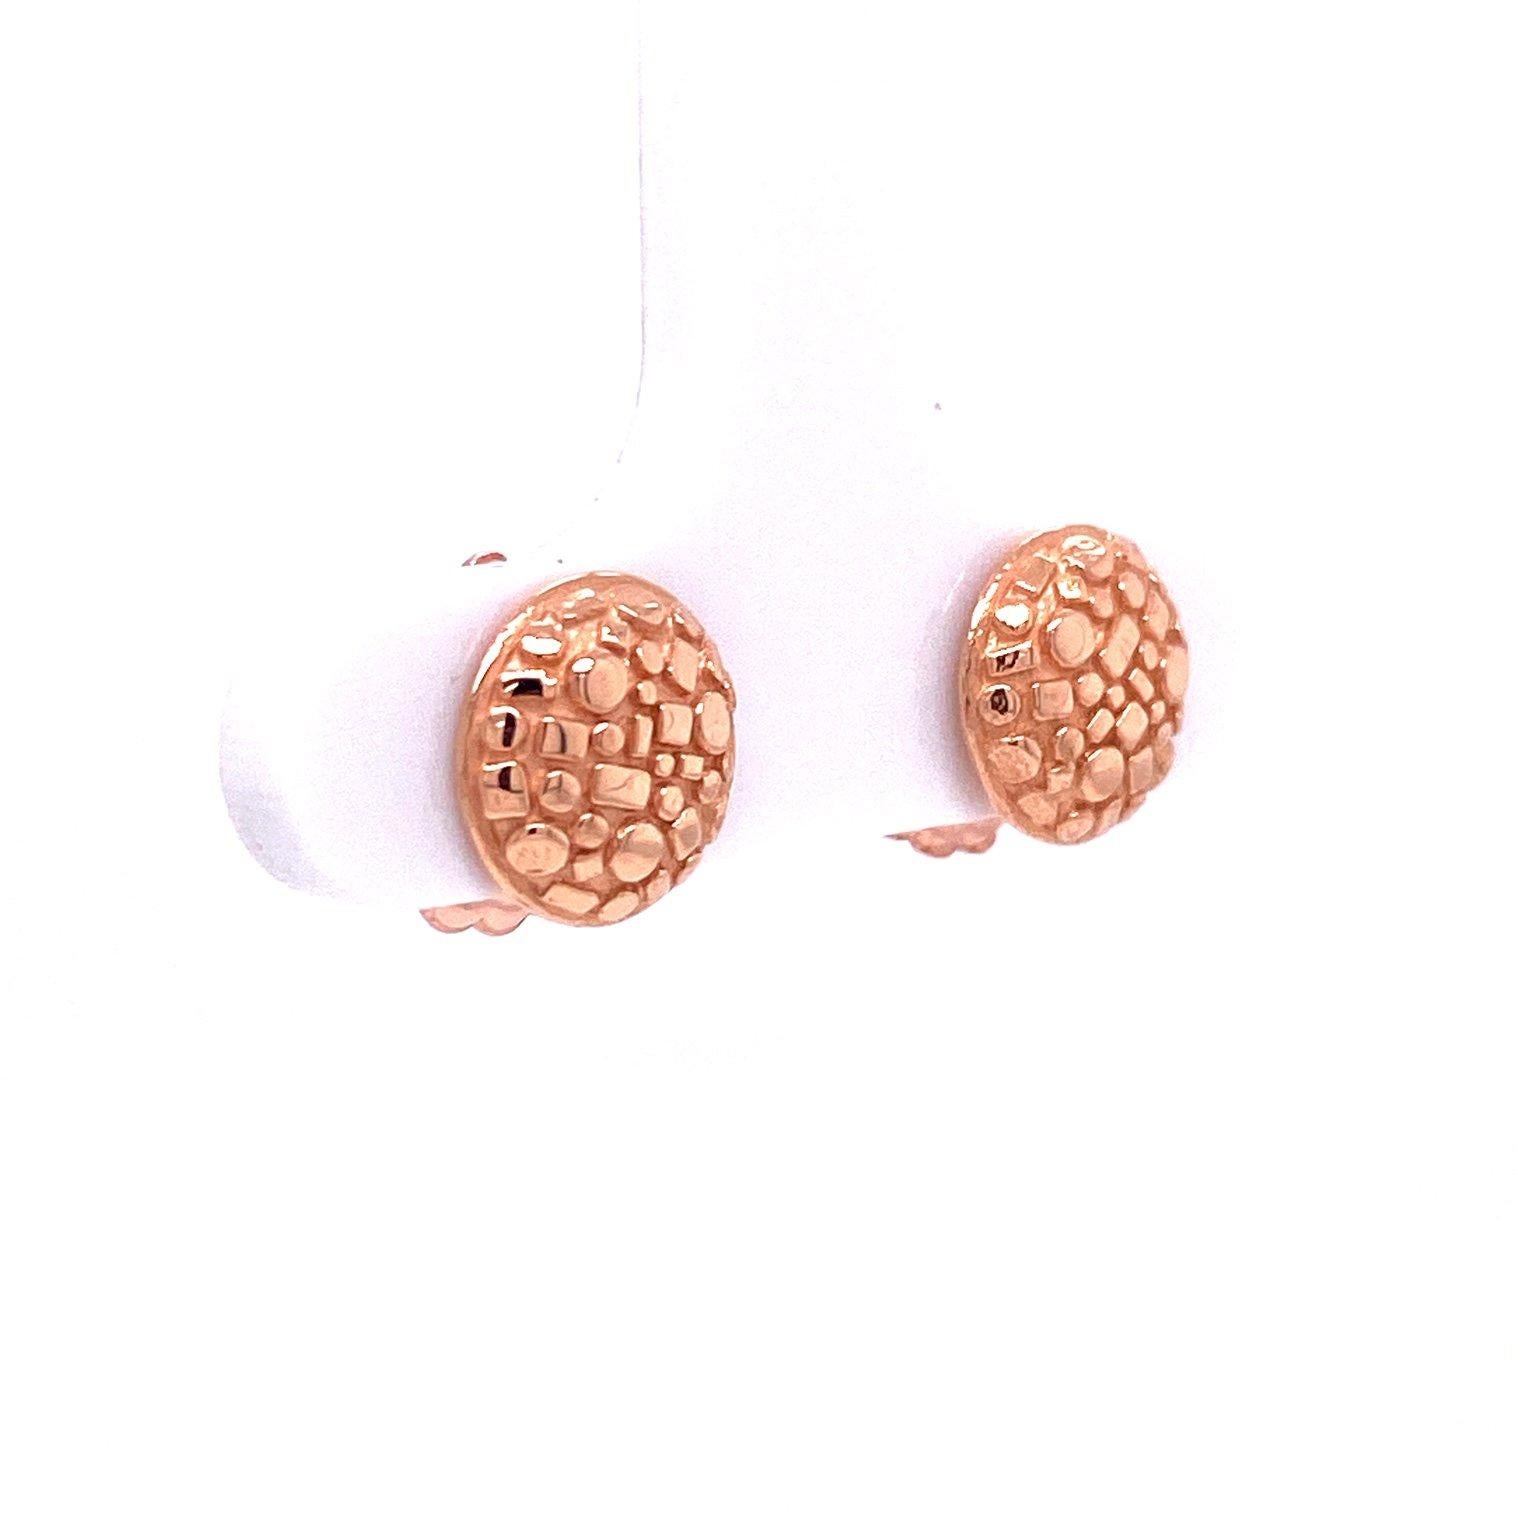 Uncut 18k Rose Gold Bits and Pieces Studs with 18k Rose Gold White Druzy Wing Jackets